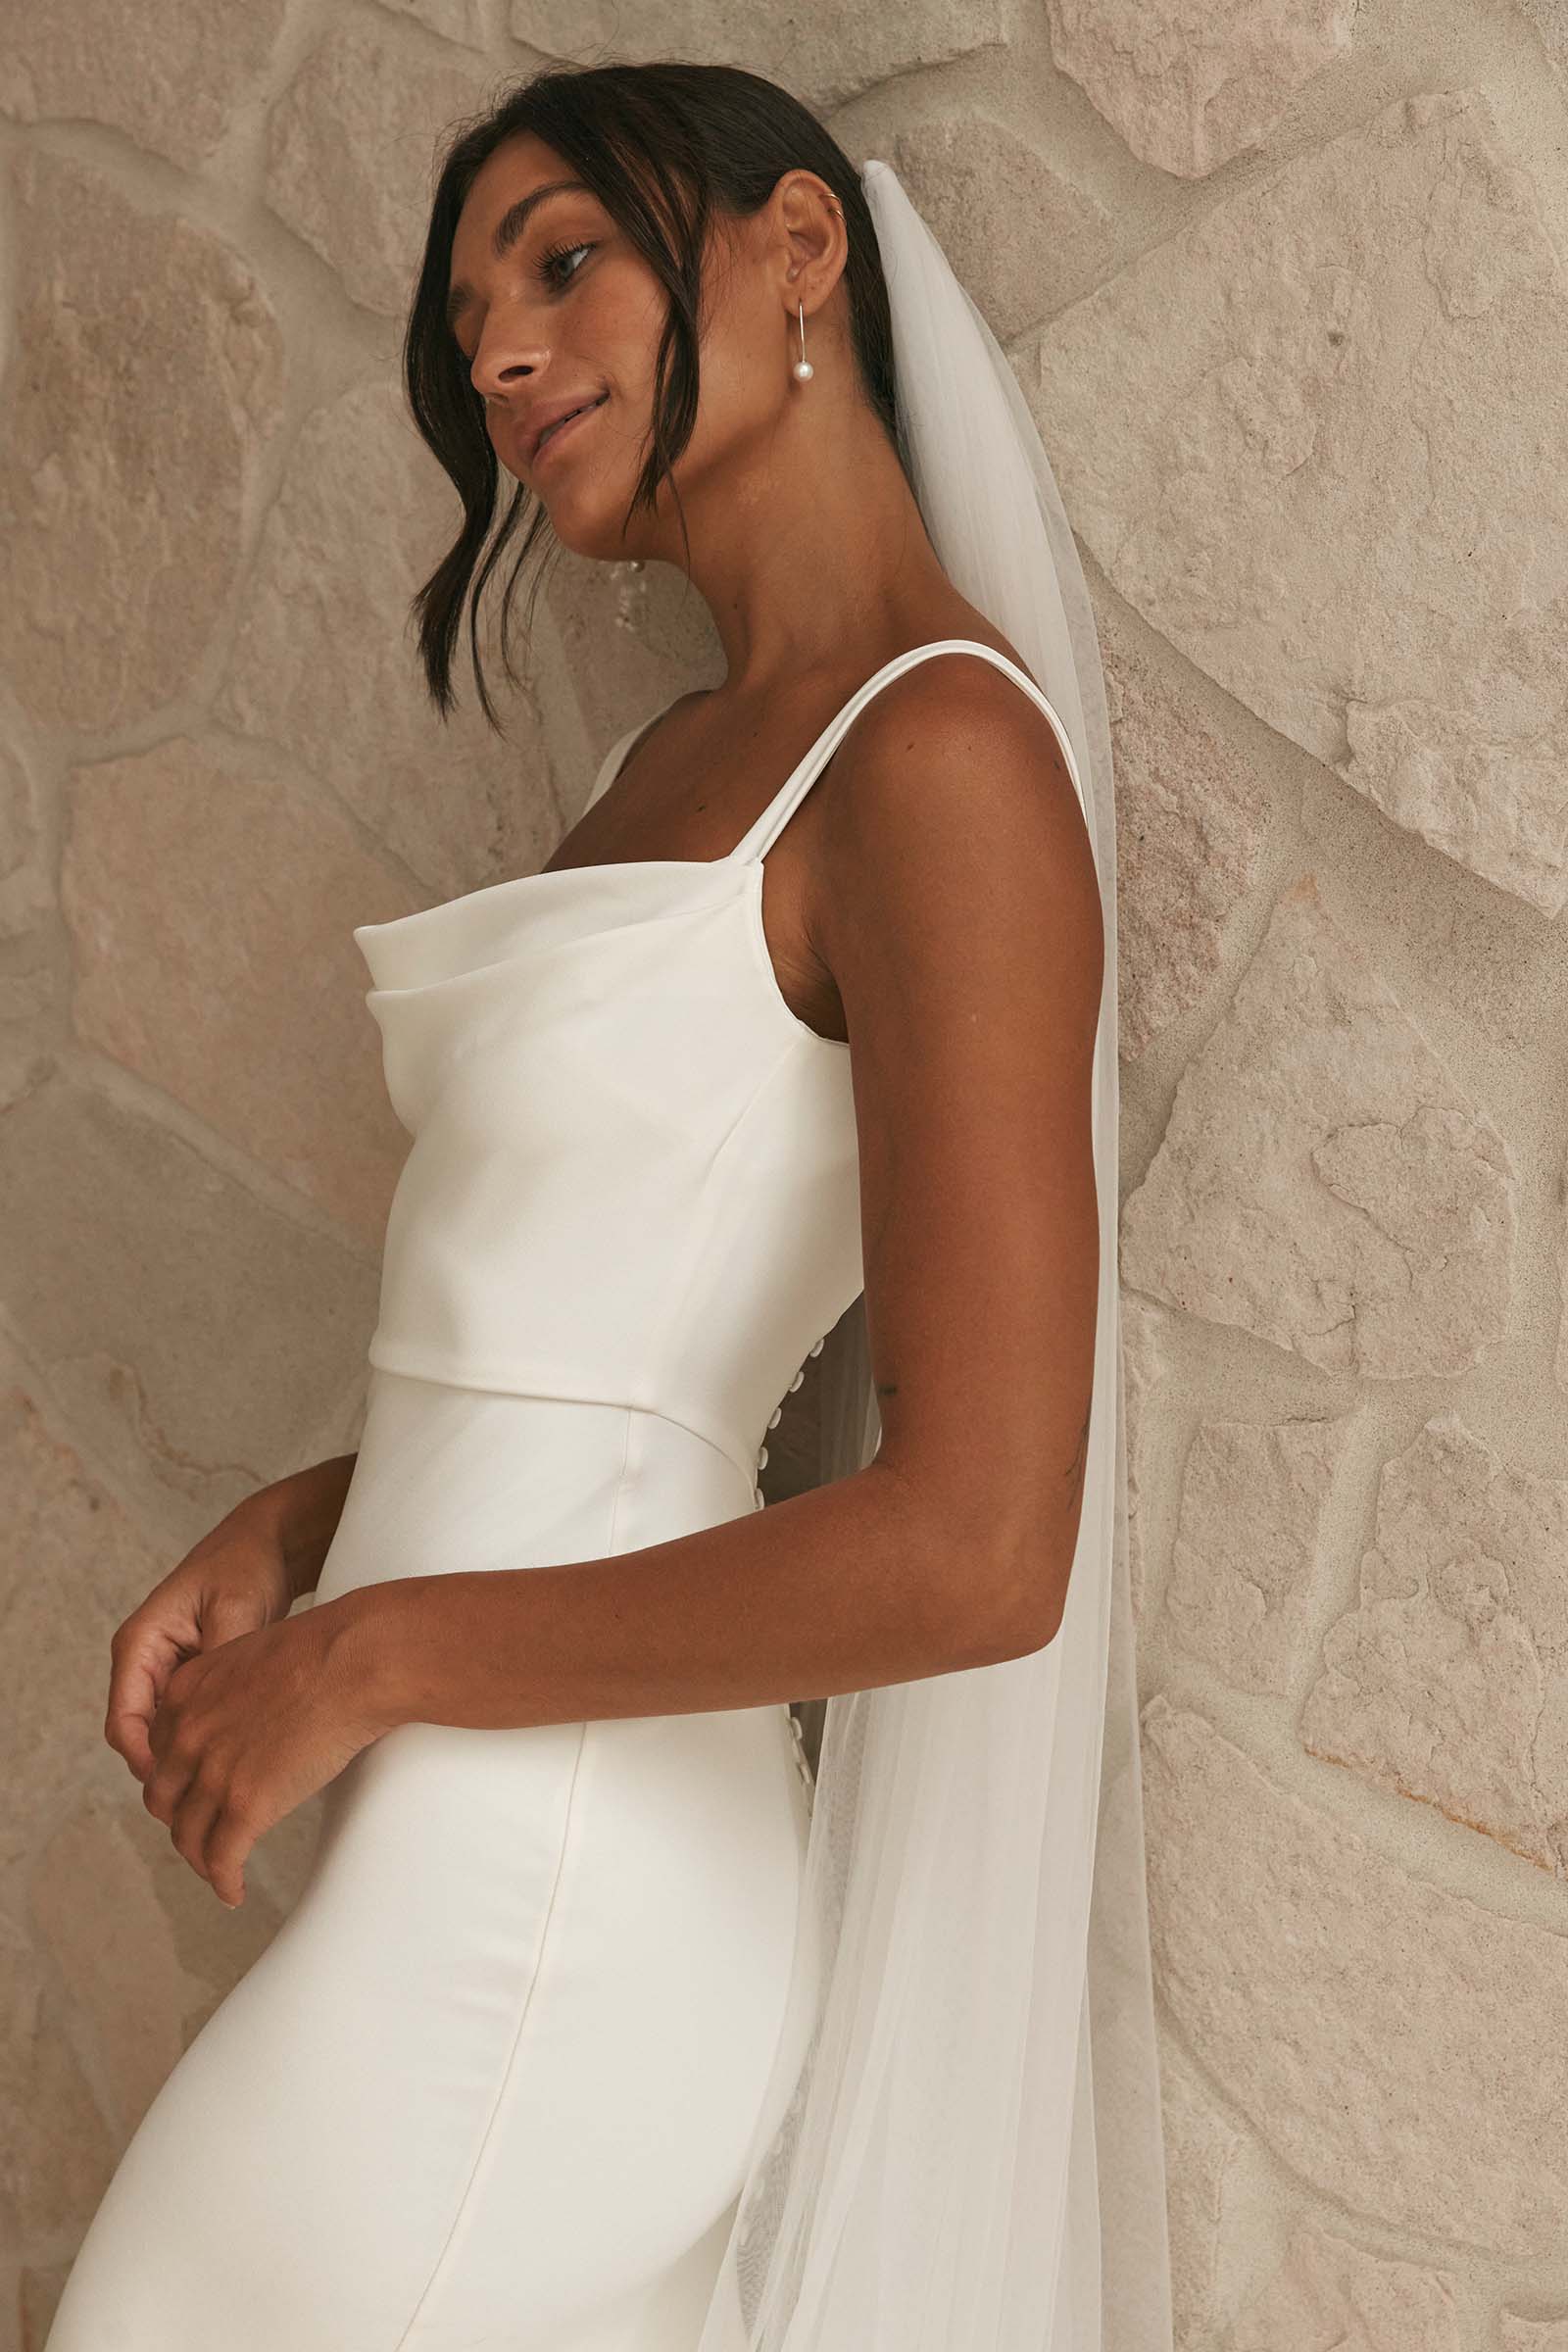 AdeOla Dress  Try at Home Wedding Dresses - Grace + Ivory